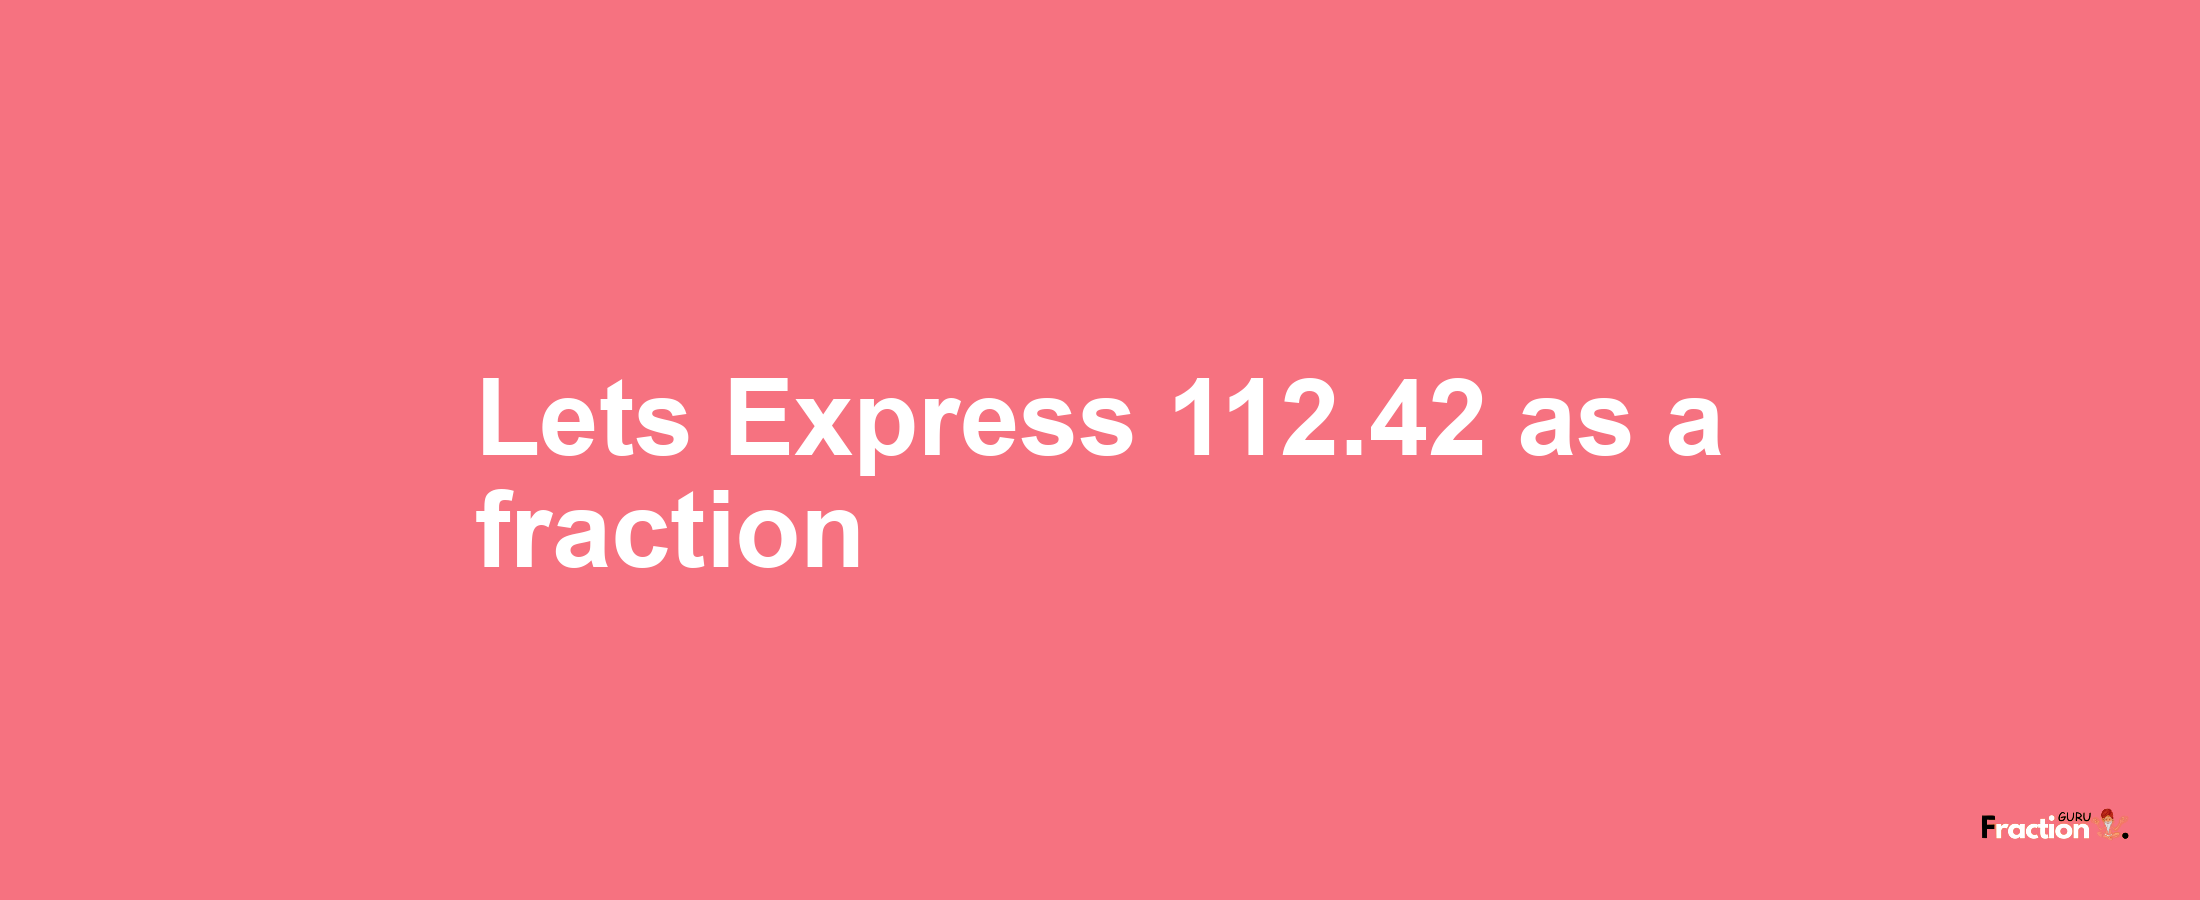 Lets Express 112.42 as afraction